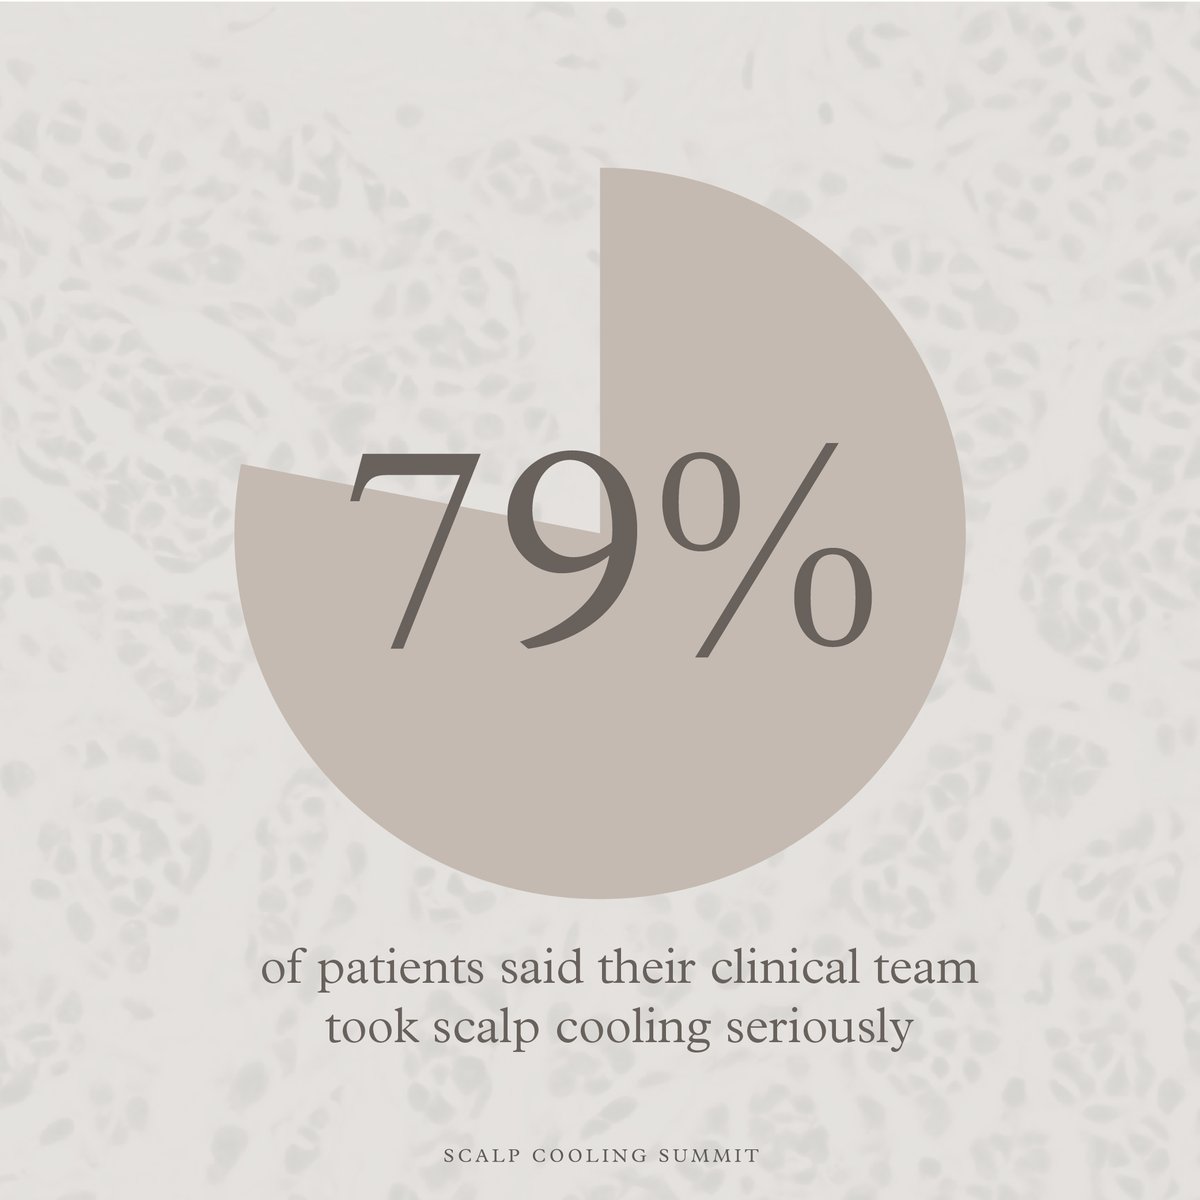 The significance of well-established #scalpcooling protocols took center stage in Summit conversations.

#SinceTheSummit, a remarkable 79% of patients reported feeling supported in their treatment, emphasizing the impact these protocols can have.

More: scalpcoolingsummit.com